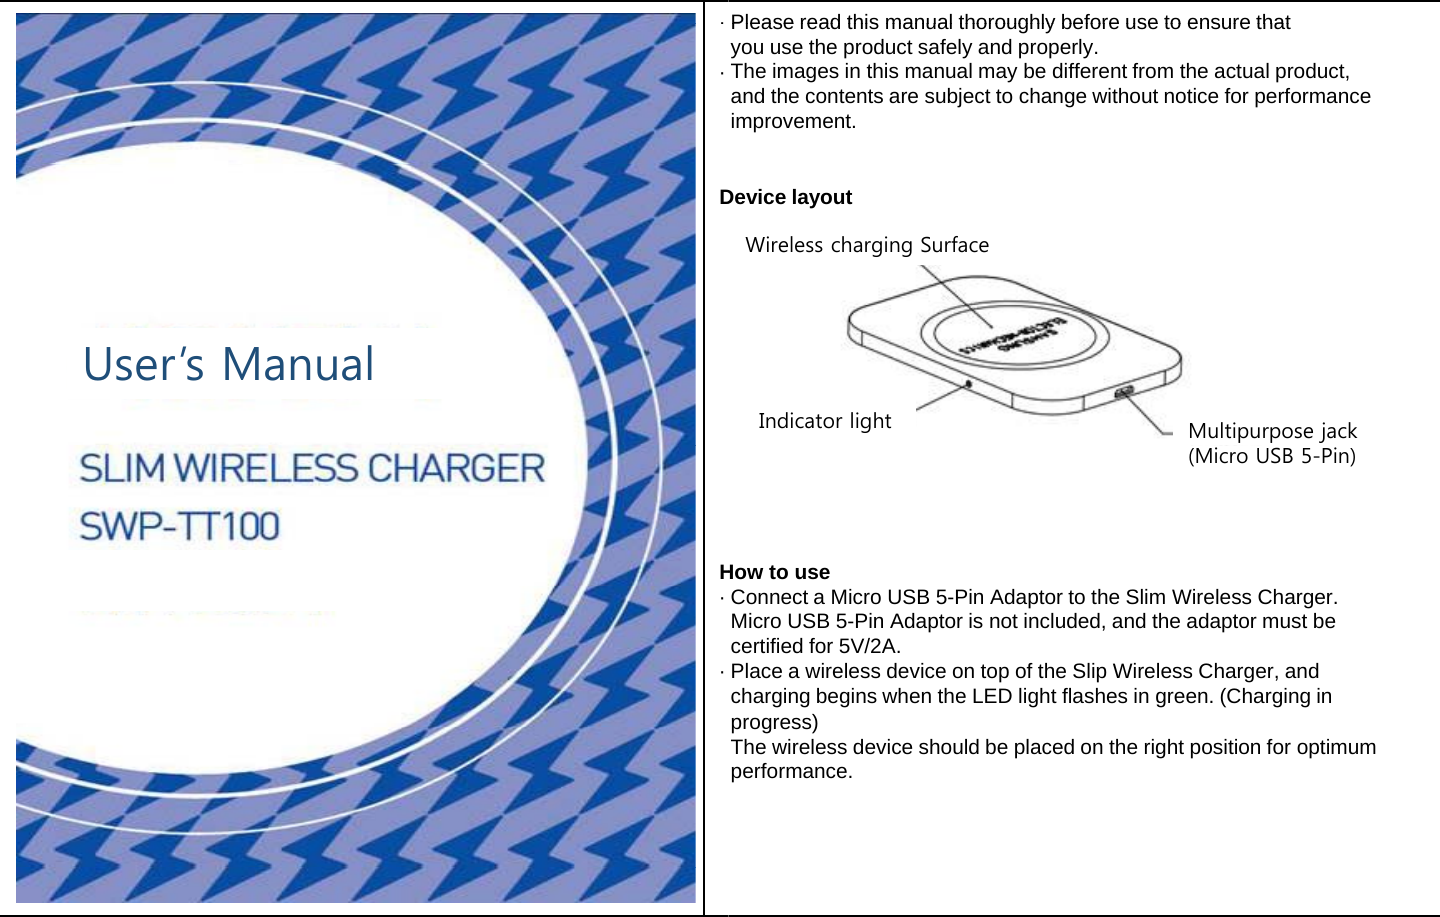 ·· DUser’s Manual H· · Pleaseread this manual thoroughly before use to ensure thatPleaseread this manual thoroughly before use to ensure thatyou use the product safely and properly.The images in this manual may be different from the actual product,and the contents are subject to change without notice for performance     improvement. Device layoutWireless charging Surface Indicator light  Multipurpose jackHow to use(Micro USB 5-Pin)Connect a Micro USB 5-Pin Adaptor to the Slim Wireless Charger. Micro USB 5-Pin Adaptor is not included, and the adaptor must be certified for 5V/2A.Place a wireless device on top of the Slip Wireless Charger, and charging begins when the LED light flashes in green. (Charging in progress)progress)The wireless device should be placed on the right position for optimum performance. 